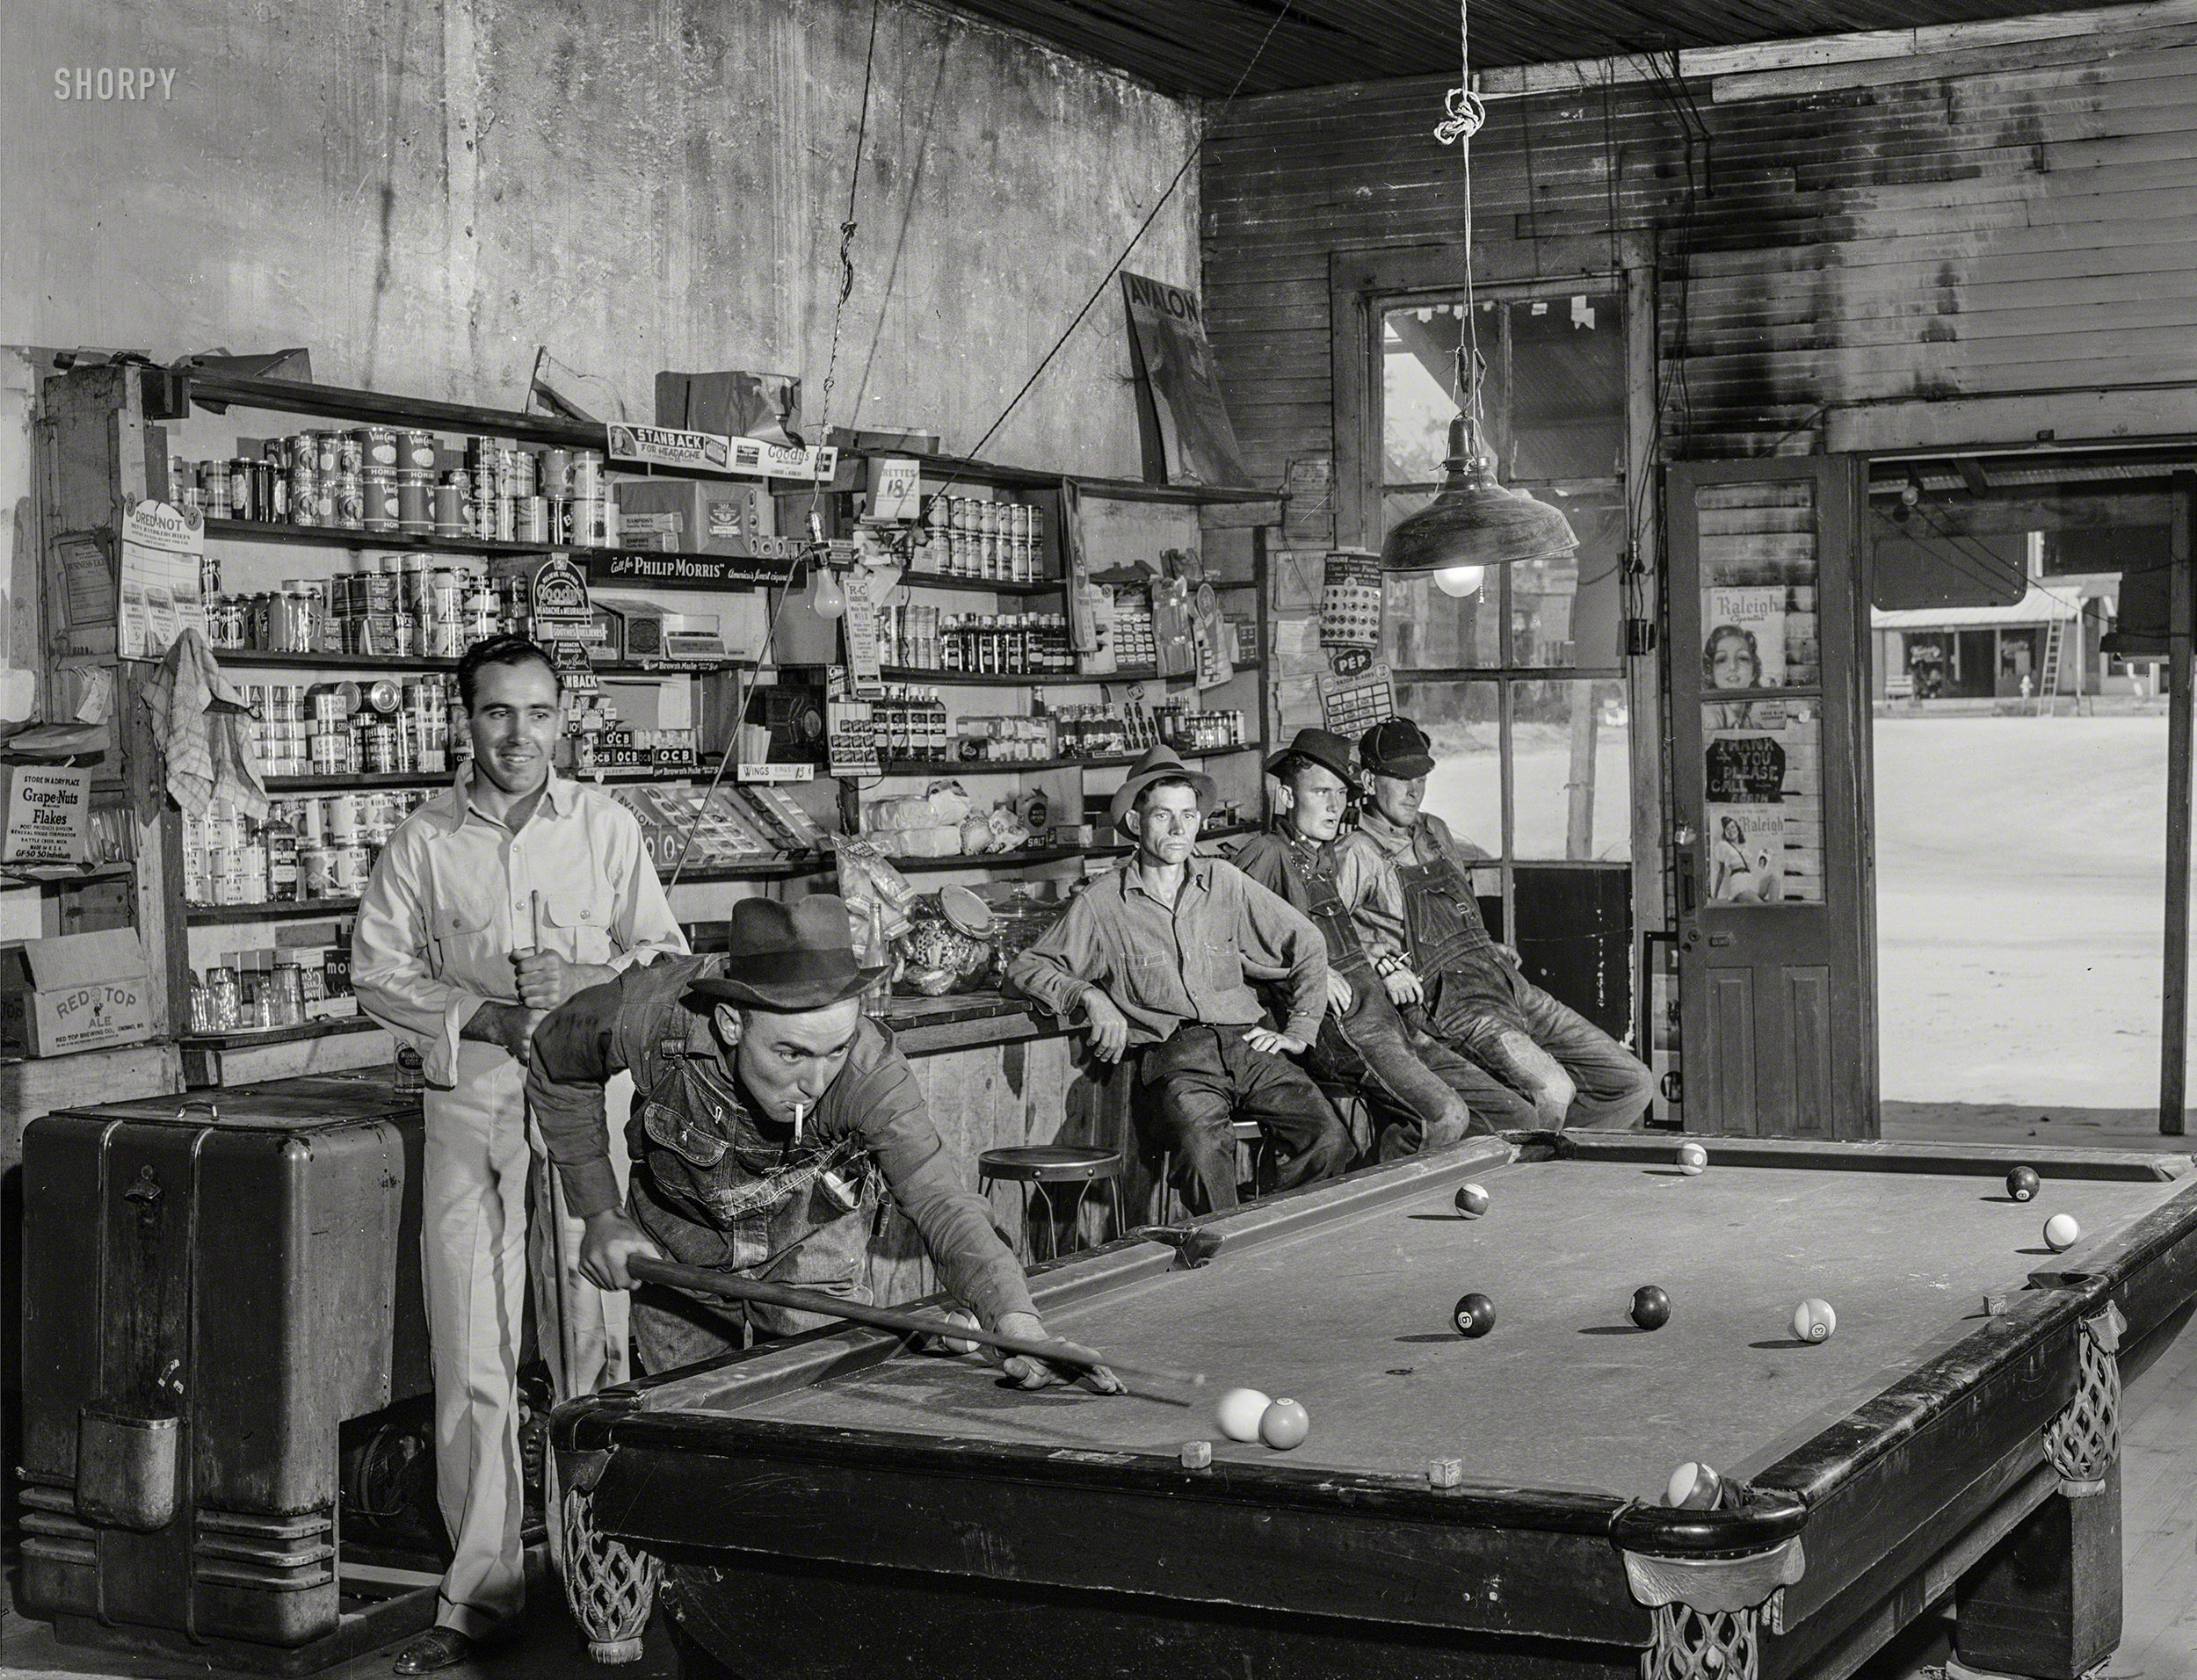 April 1941. "A game of pool in the general store. Franklin, Heard County, Georgia." The contest last seen here. Acetate negative by Jack Delano. View full size.